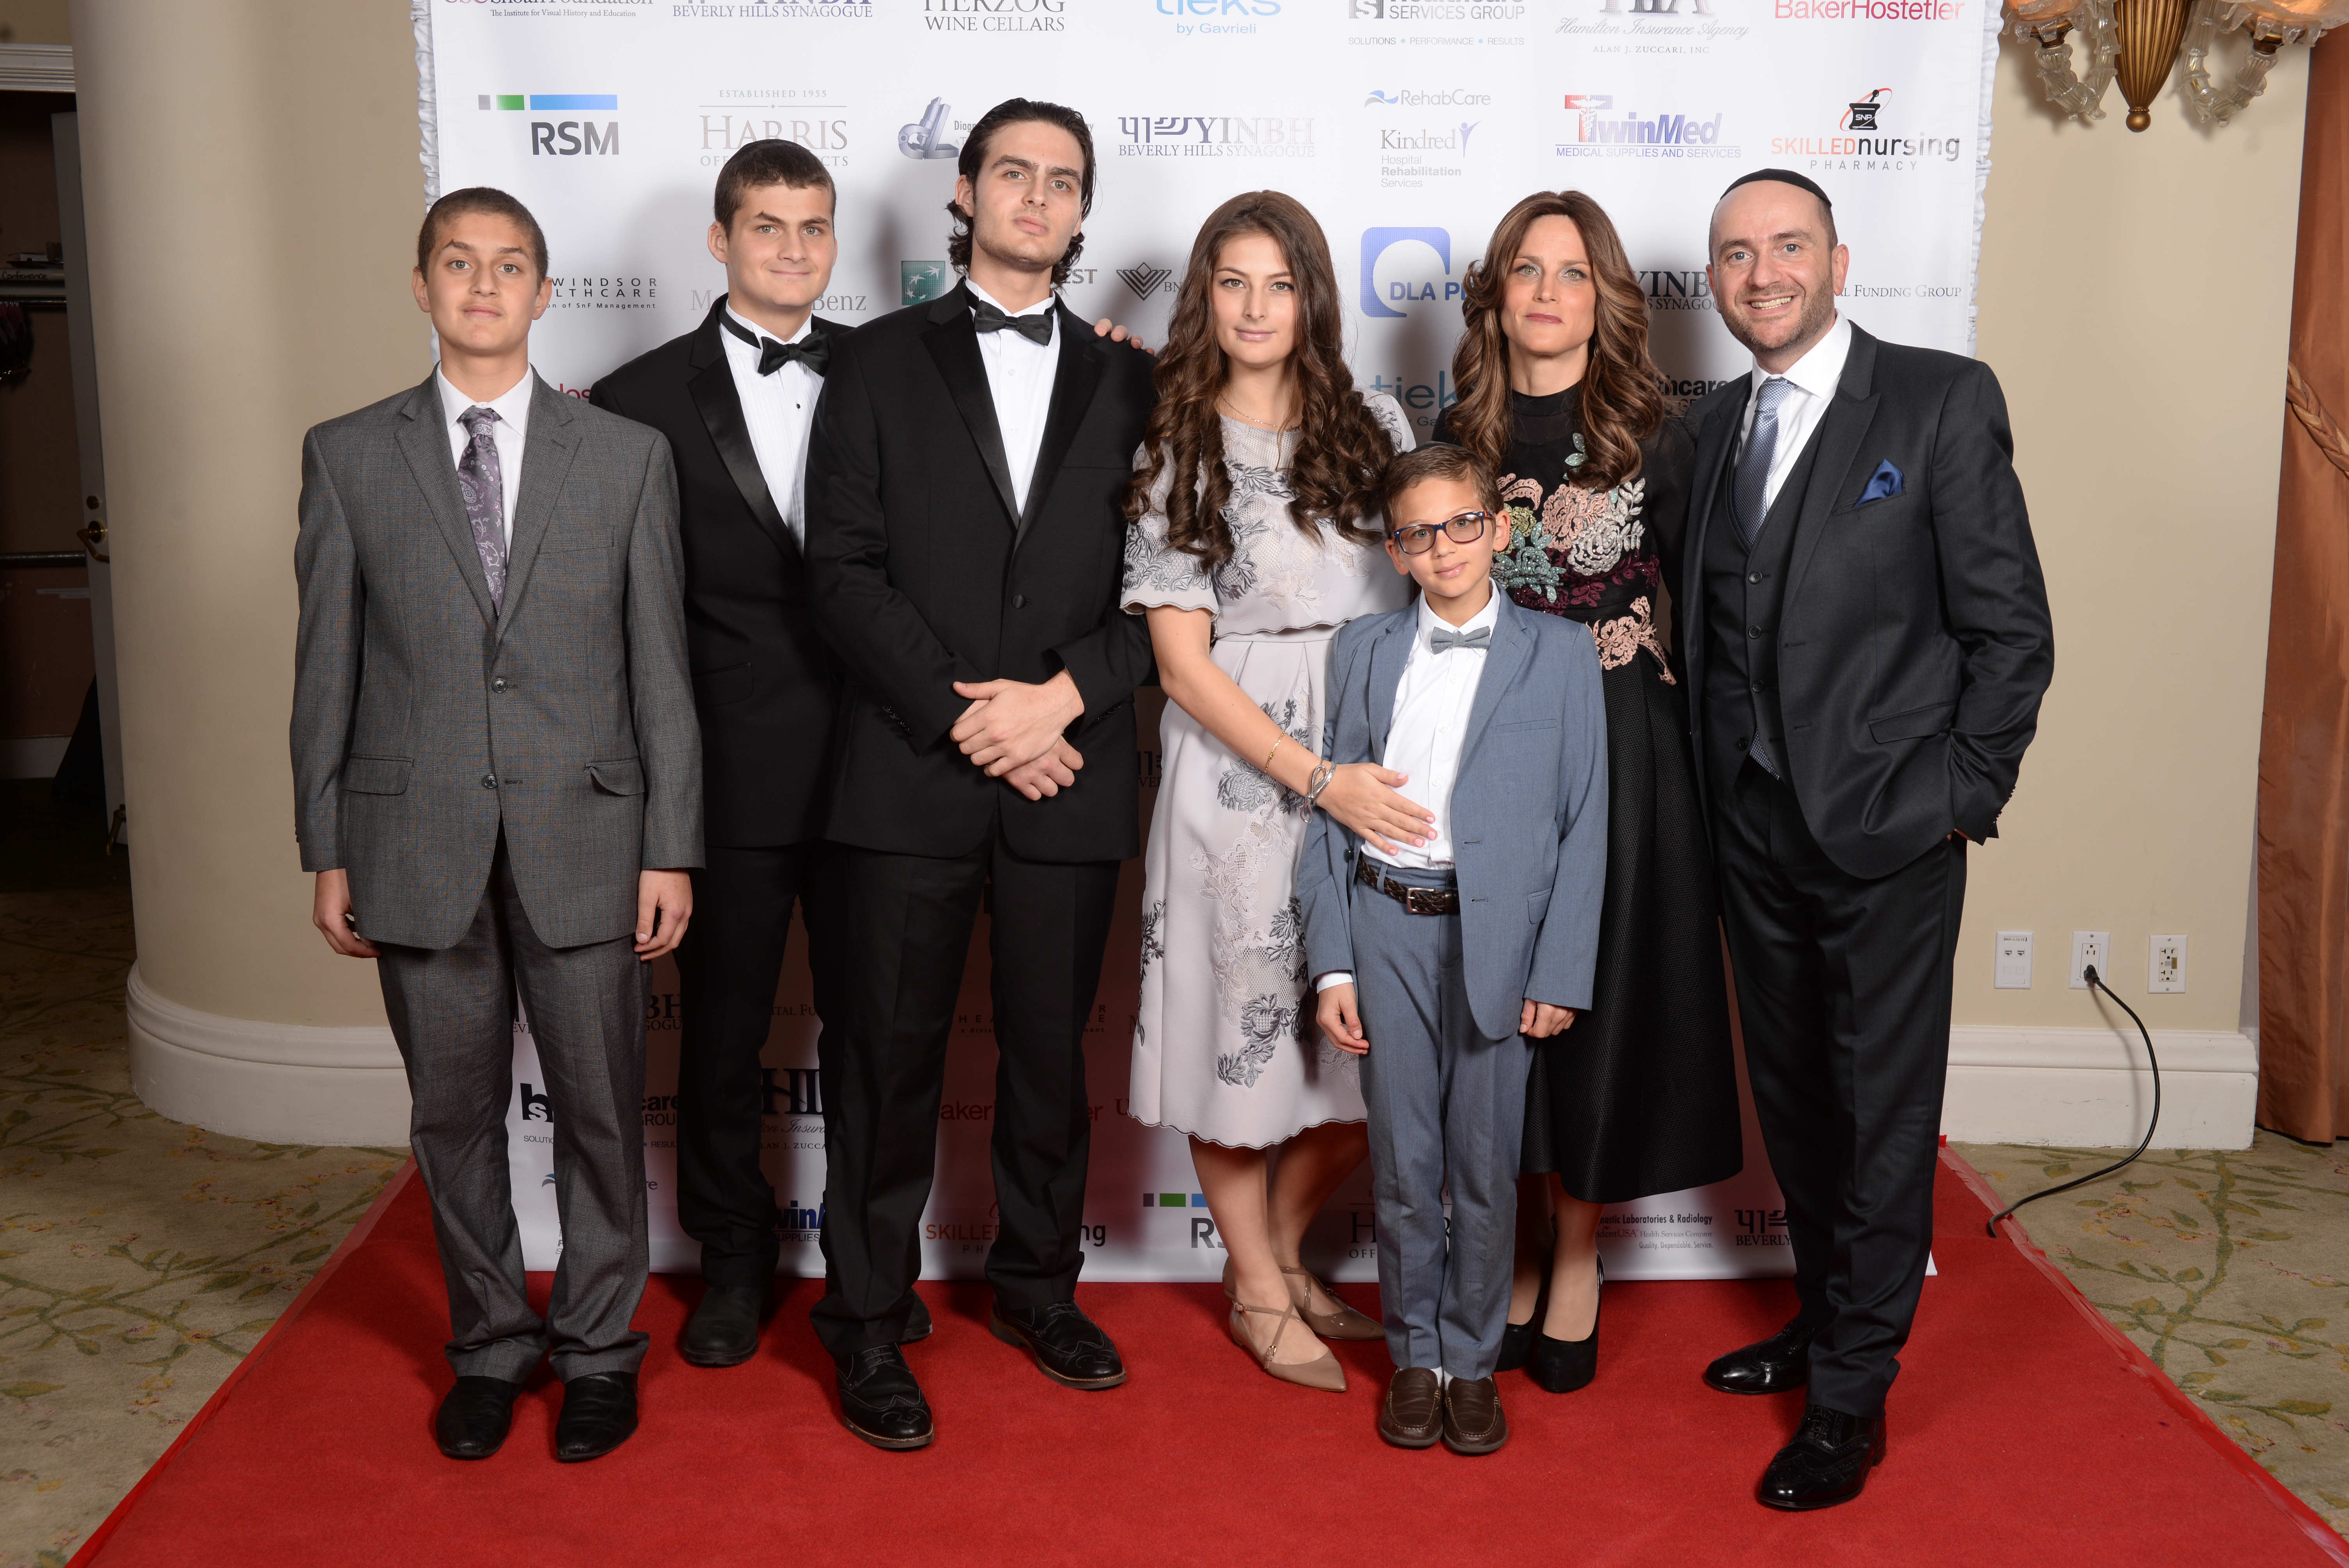 Rabbi Dunner and his family at the Beverly Hills Synagogue Annual Gala honoring Irena & George Schaefer, Beverly Hills Hotel (03/26/2017)